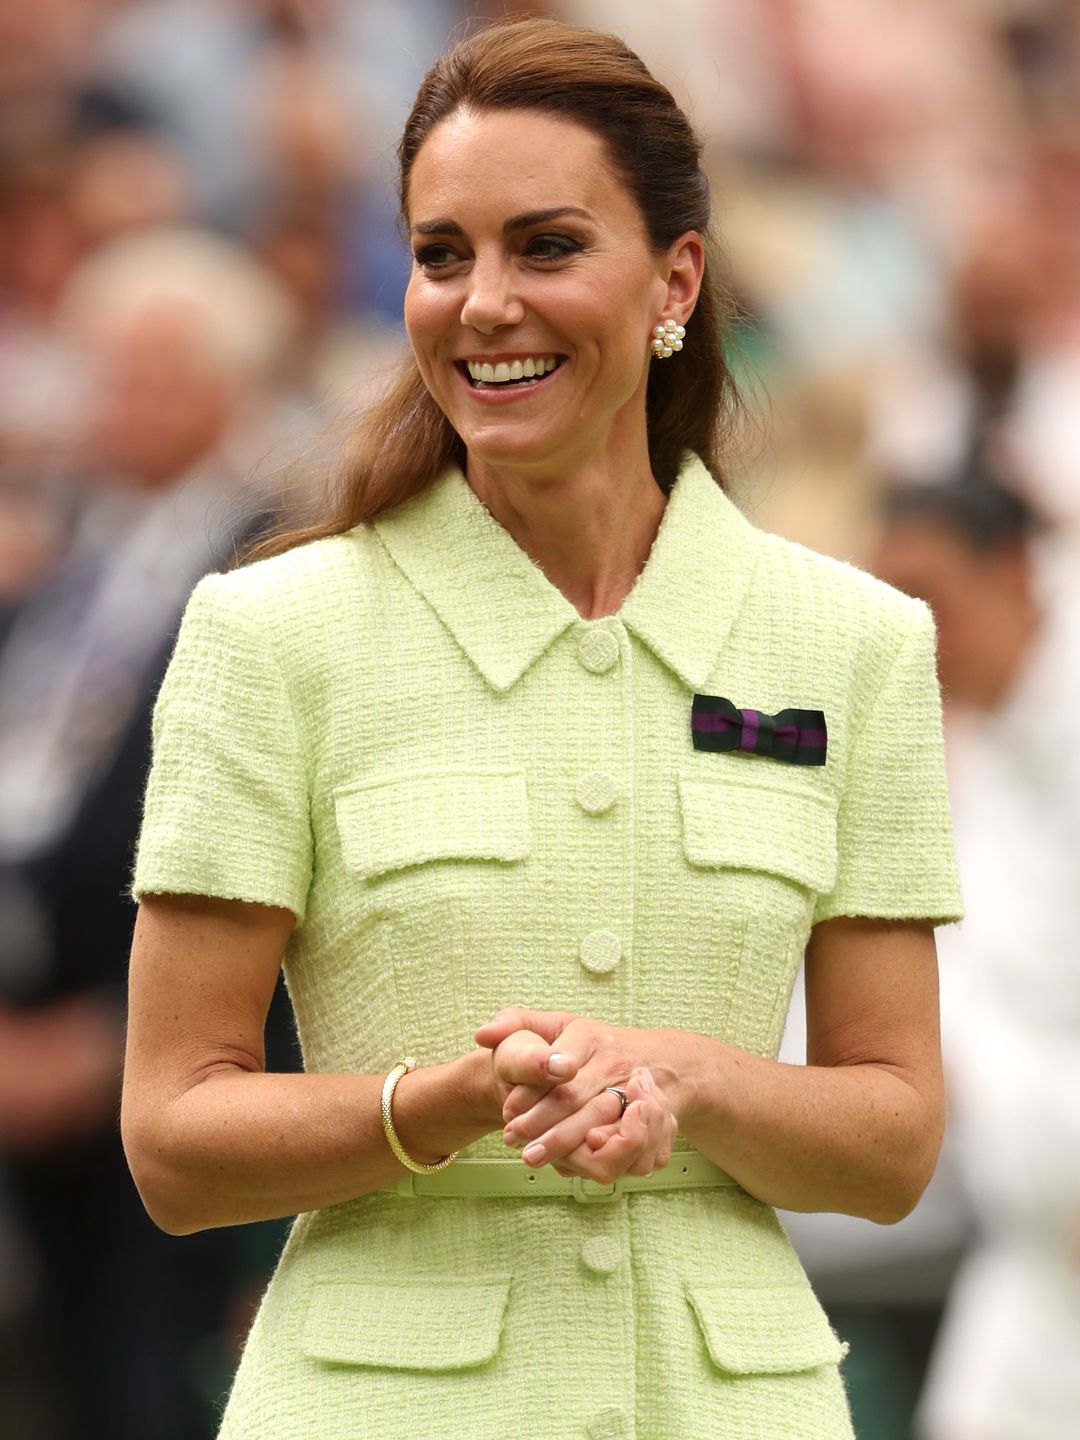 LONDON, ENGLAND - JULY 15: Catherine, Princess of Wales looks on following Marketa Vondrousova of Czech Republic's victory in the Women's Singles Final against Ons Jabeur of Tunisia on day thirteen of The Championships Wimbledon 2023 at All England Lawn Tennis and Croquet Club on July 15, 2023 in London, England. (Photo by Julian Finney/Getty Images)